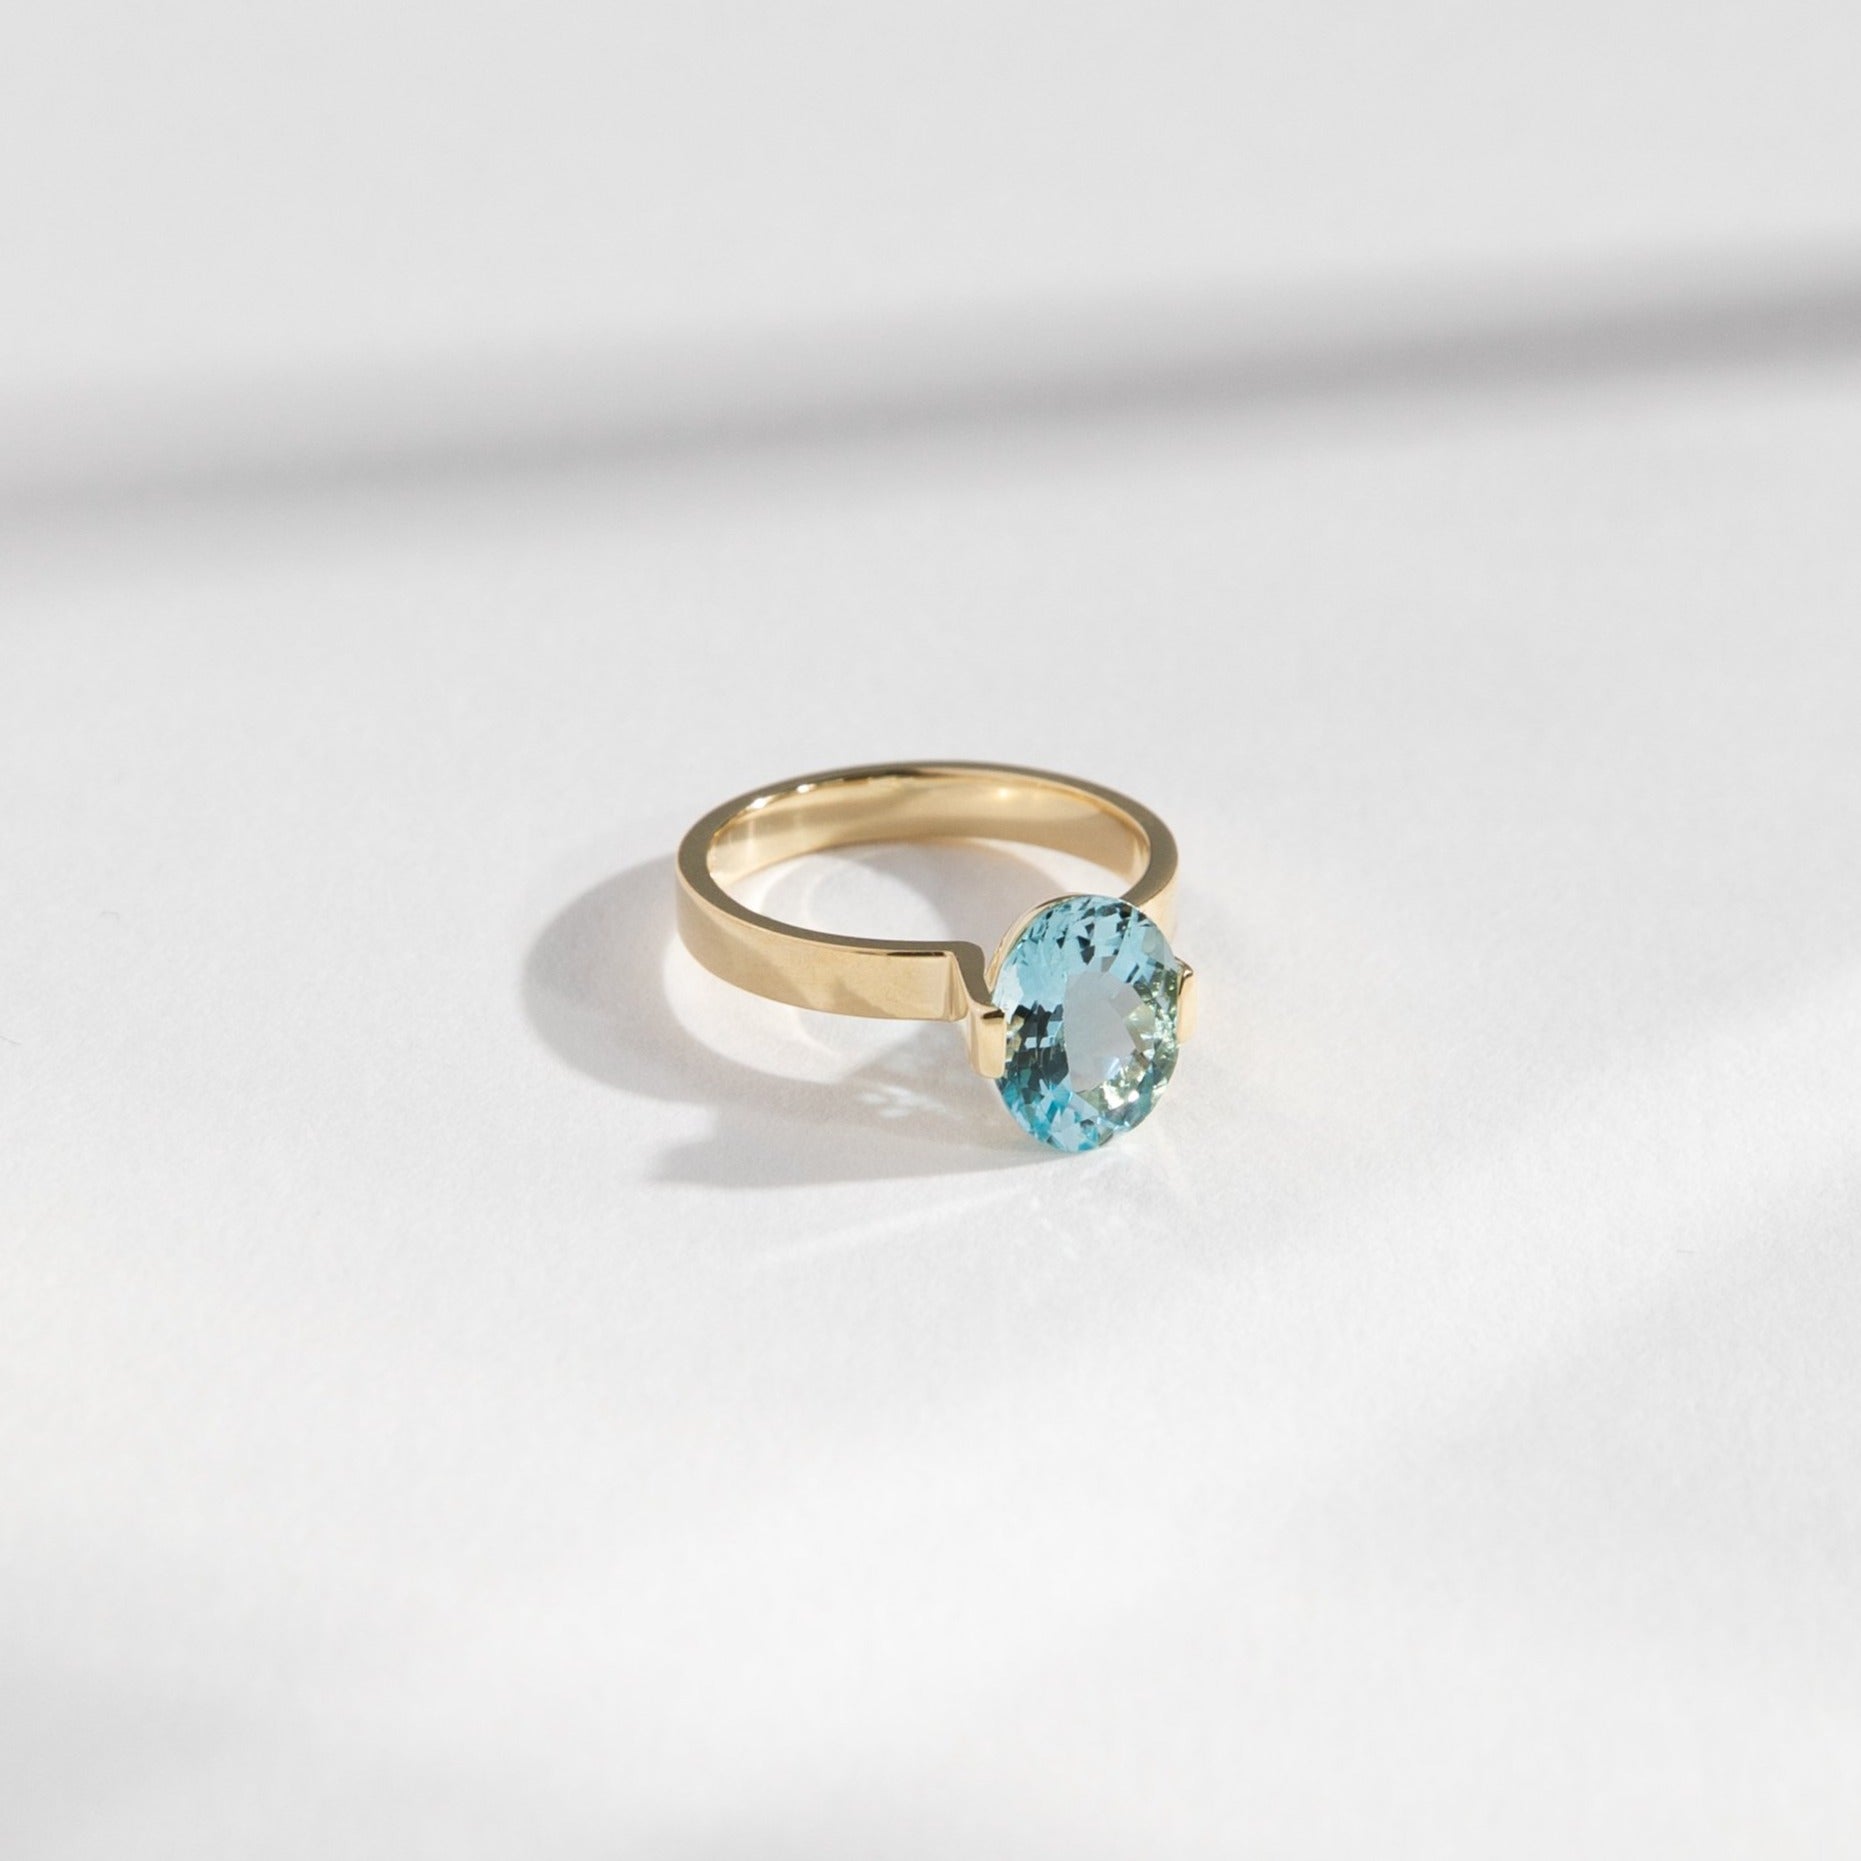 Silva Handmade Ring in 14k Gold set with a 2.07ct oval brilliant cut aquamarine By SHW Fine Jewelry New York City